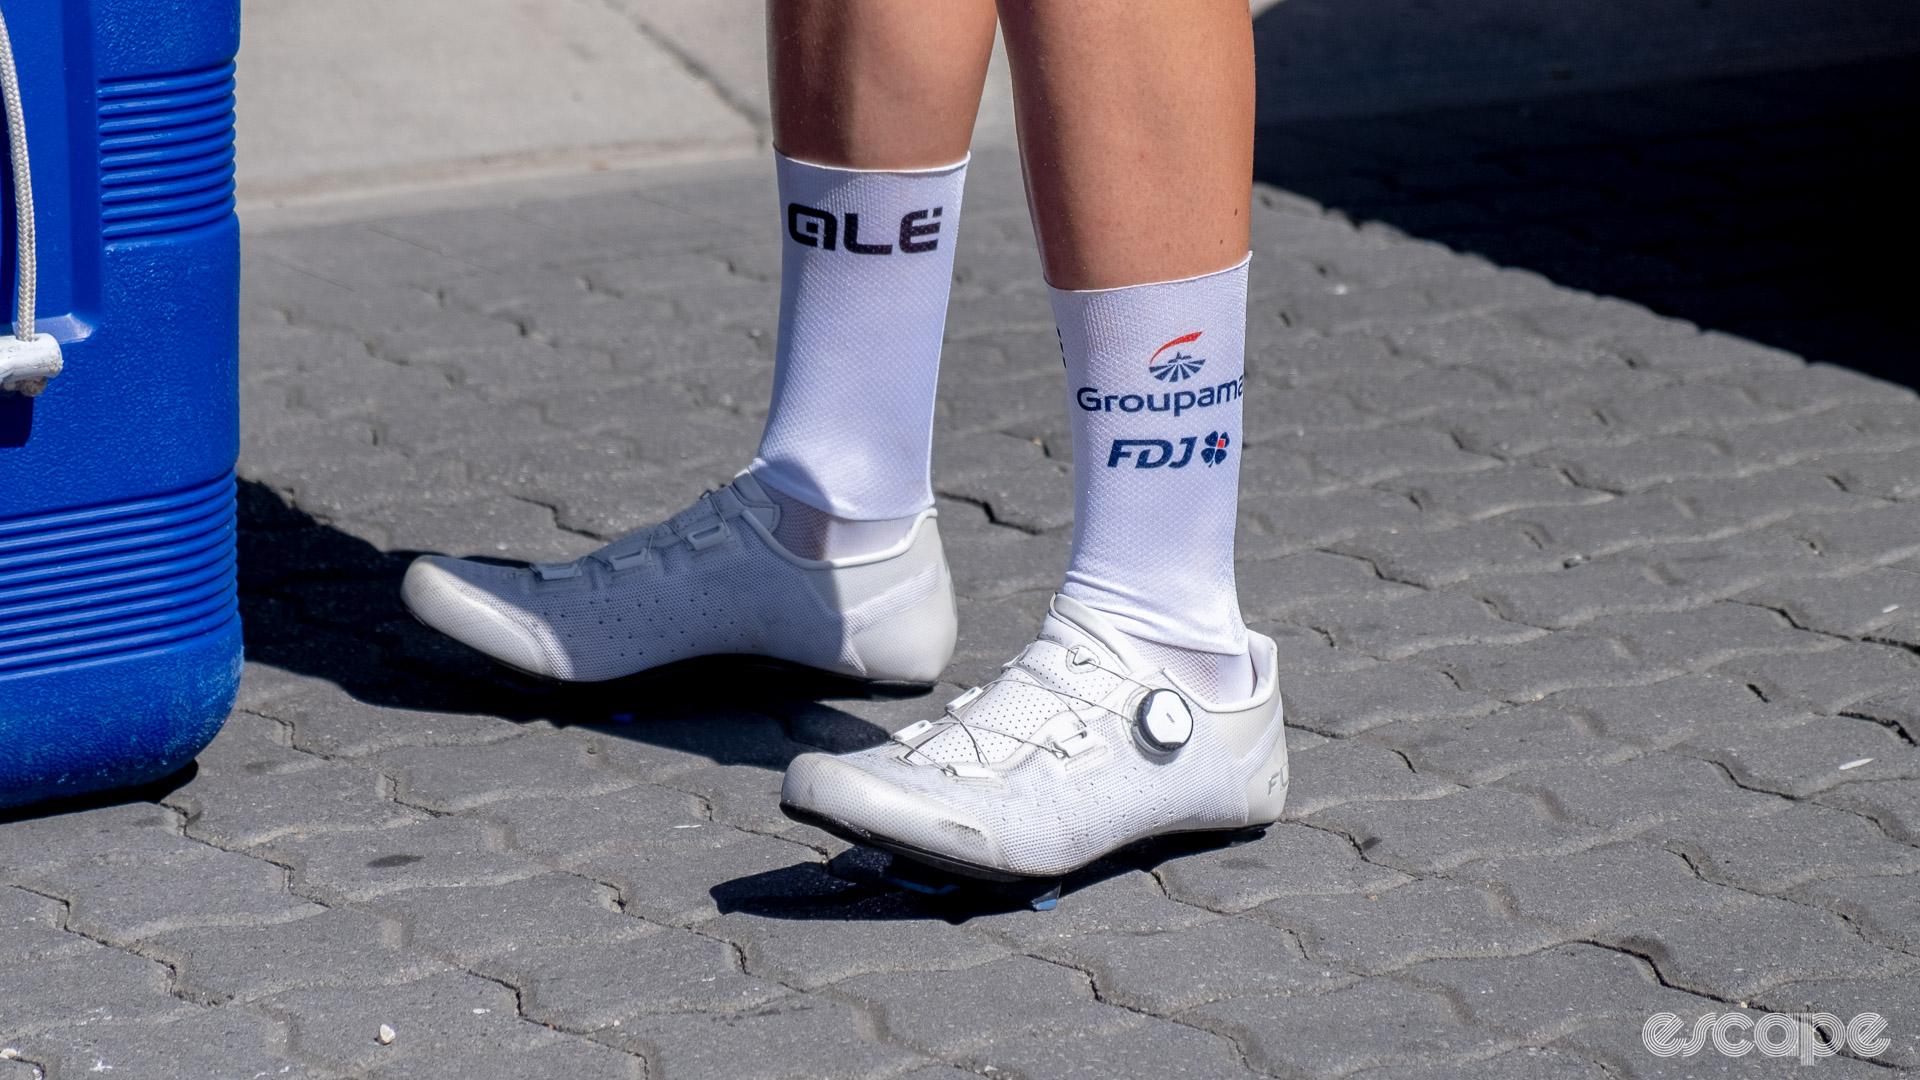 The photo shows FLR cycling shoes